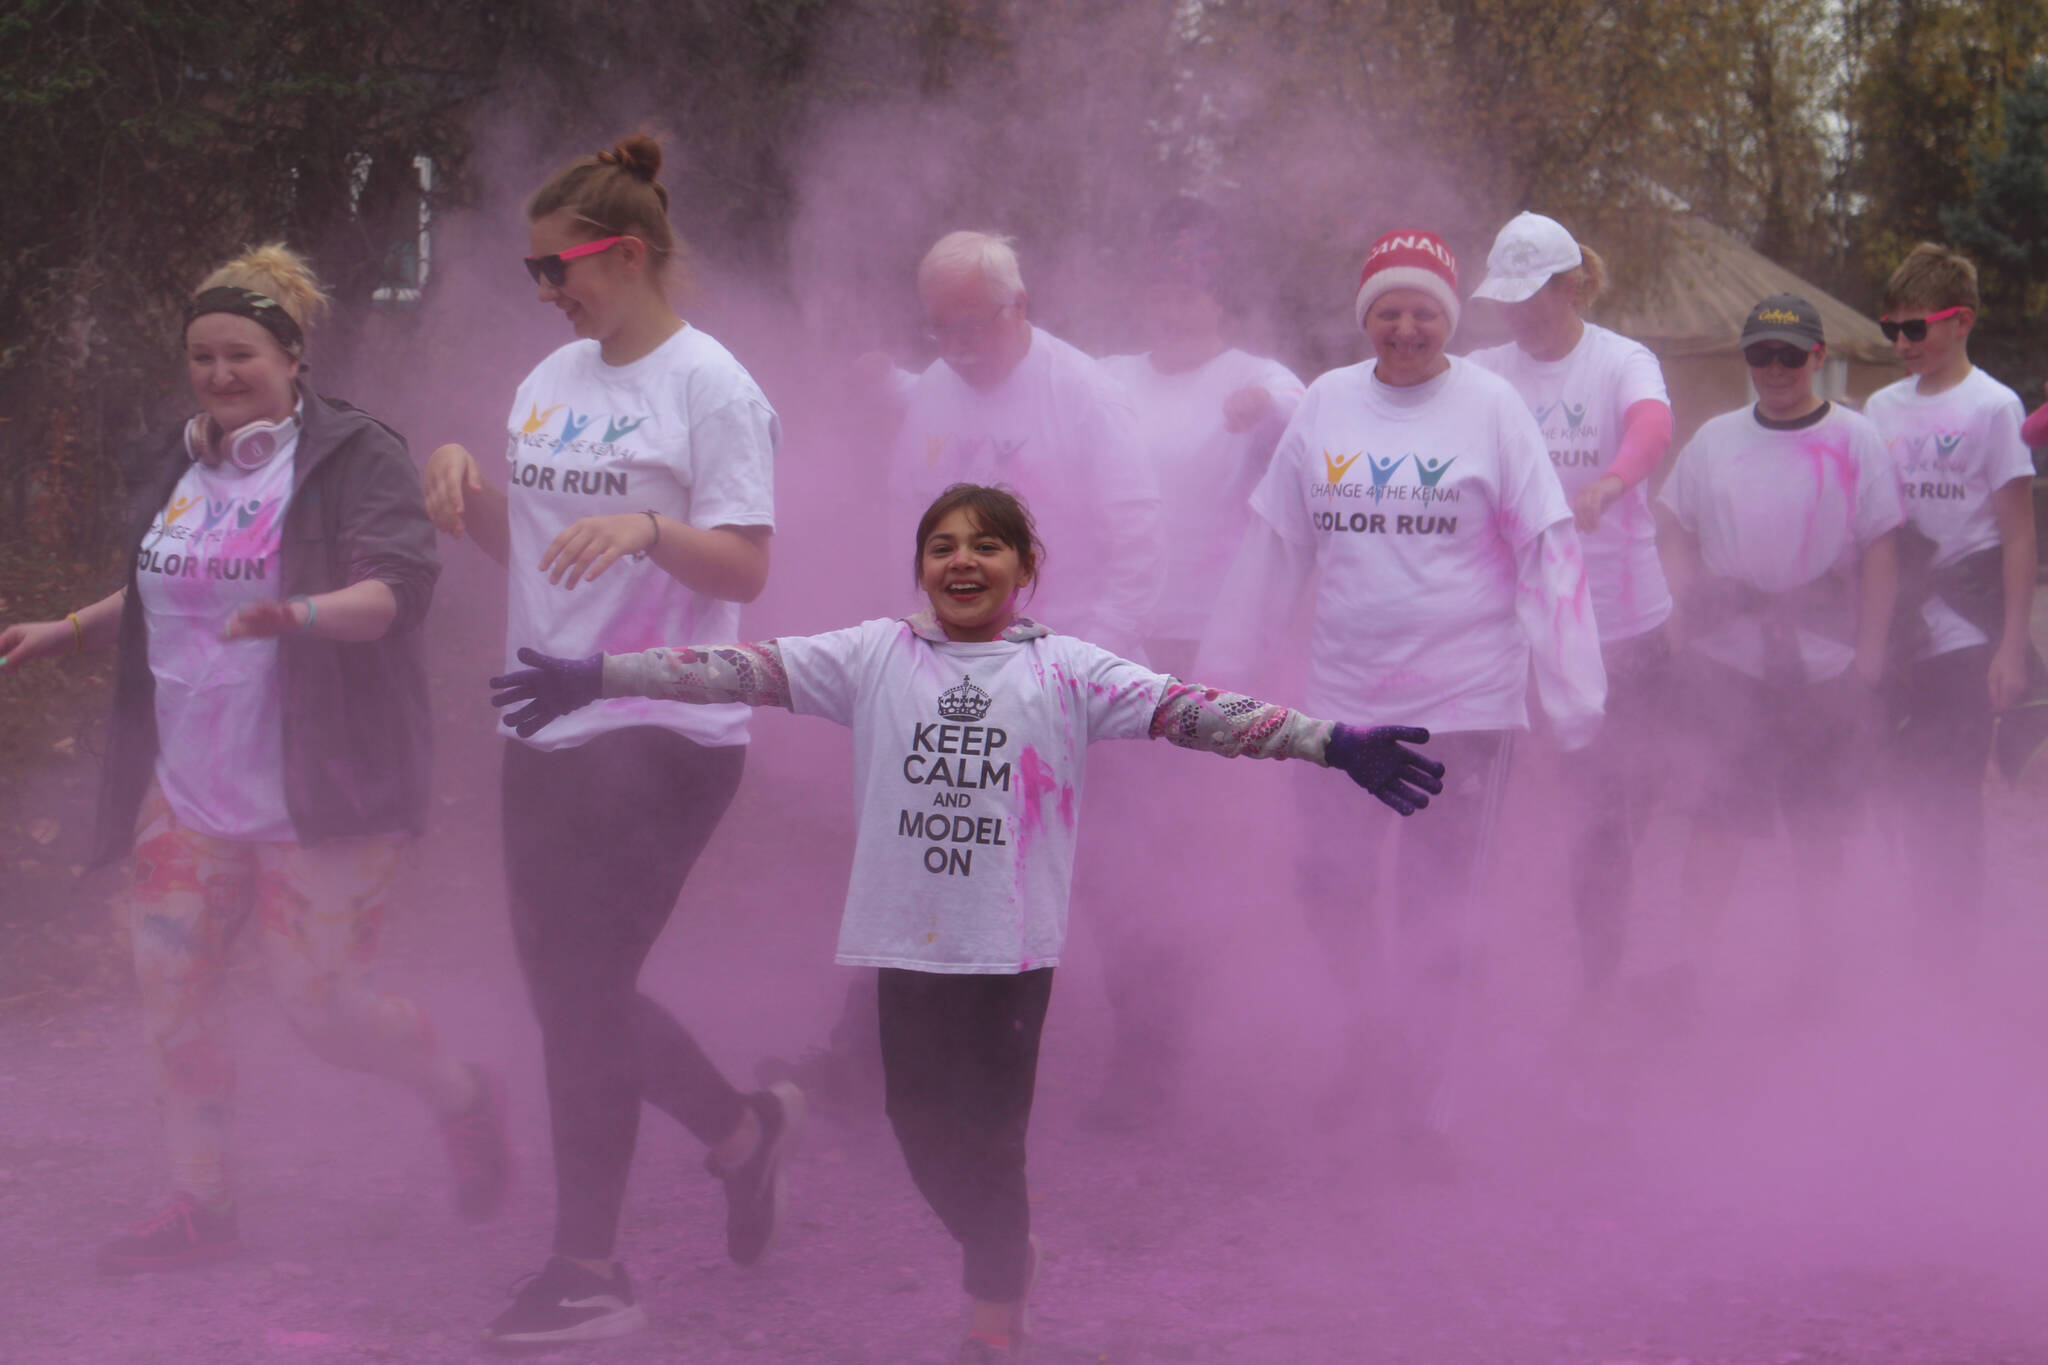 Peninsula Clarion file
Participants in the 2019 Stomp Out Stigma Color Run make their way through a haze of pink chalk at Soldotna Creek Park on Sept. 28, 2019.